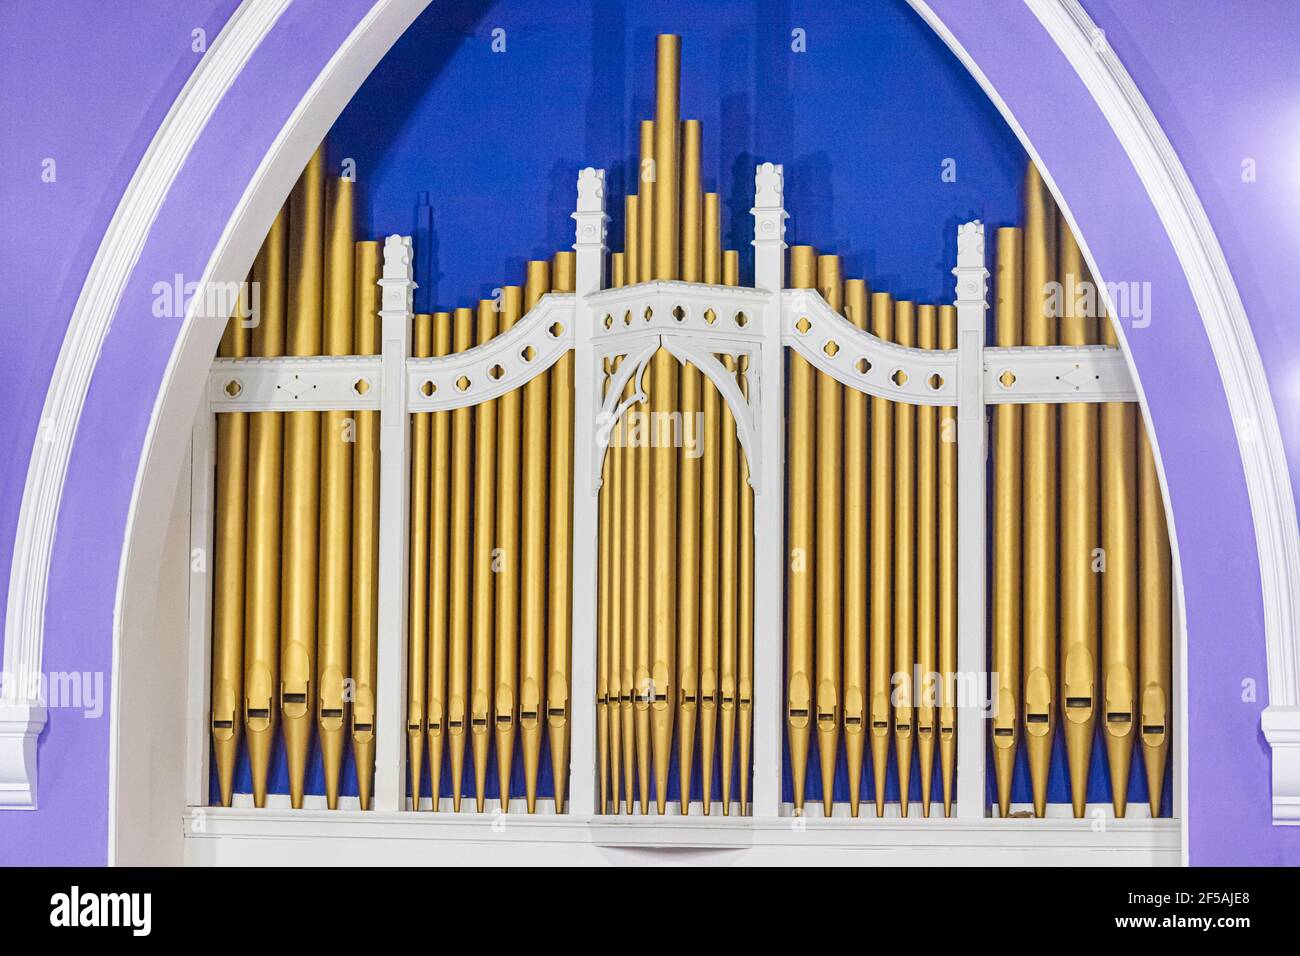 Gold painted pipes on a small church organ. Stock Photo